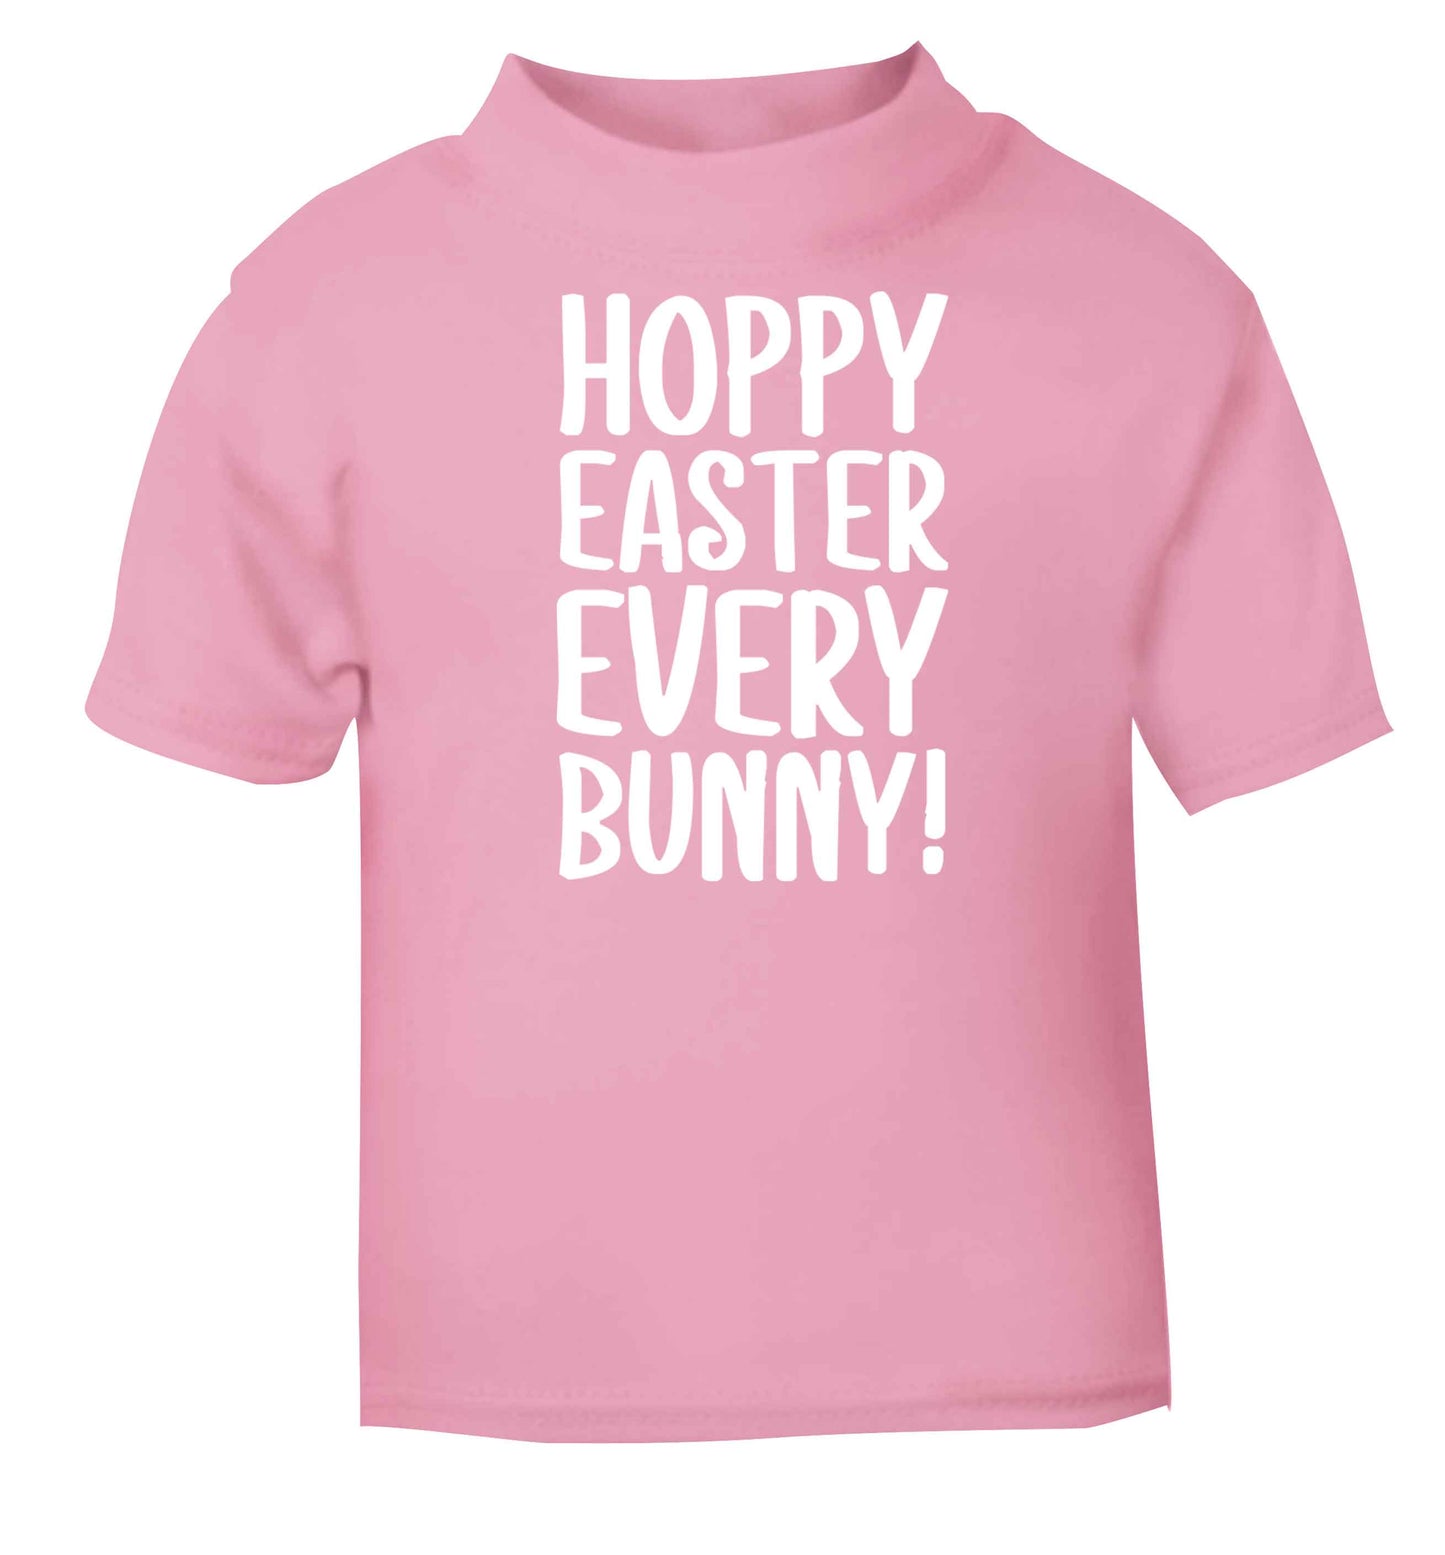 Hoppy Easter every bunny! light pink baby toddler Tshirt 2 Years